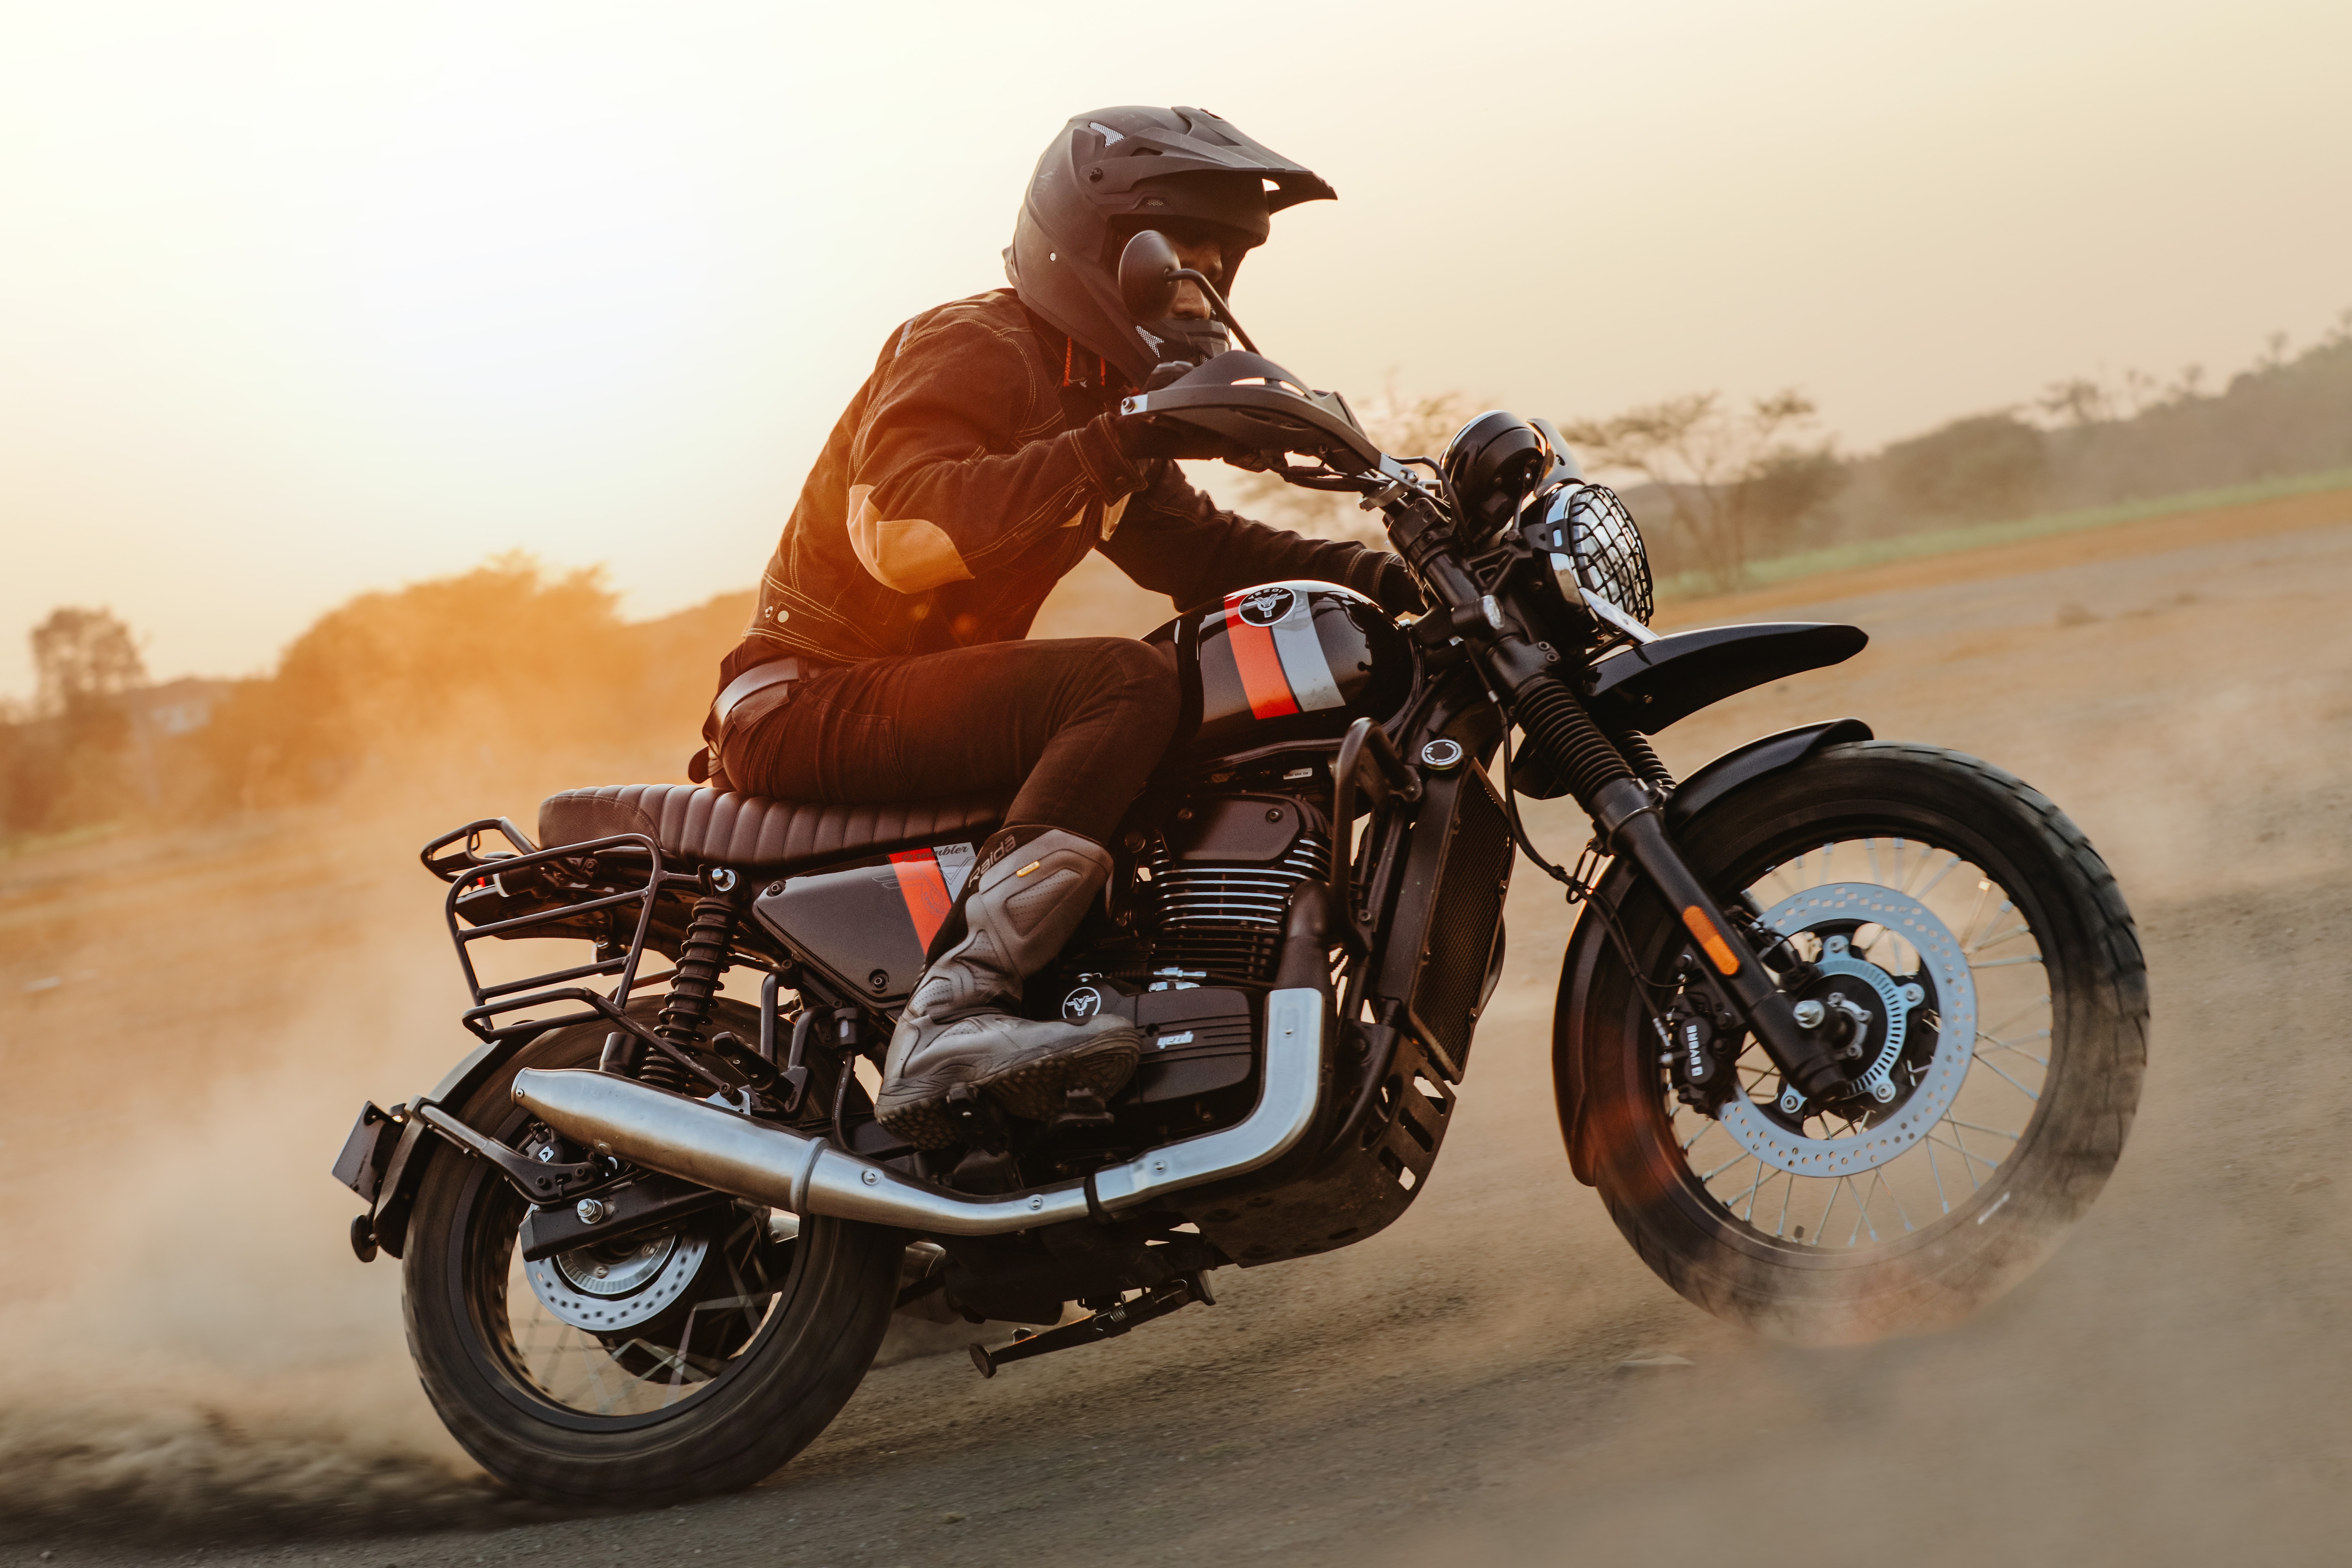 2023 Yezdi Scrambler now available in Bold Black shade with Gloss Black finish